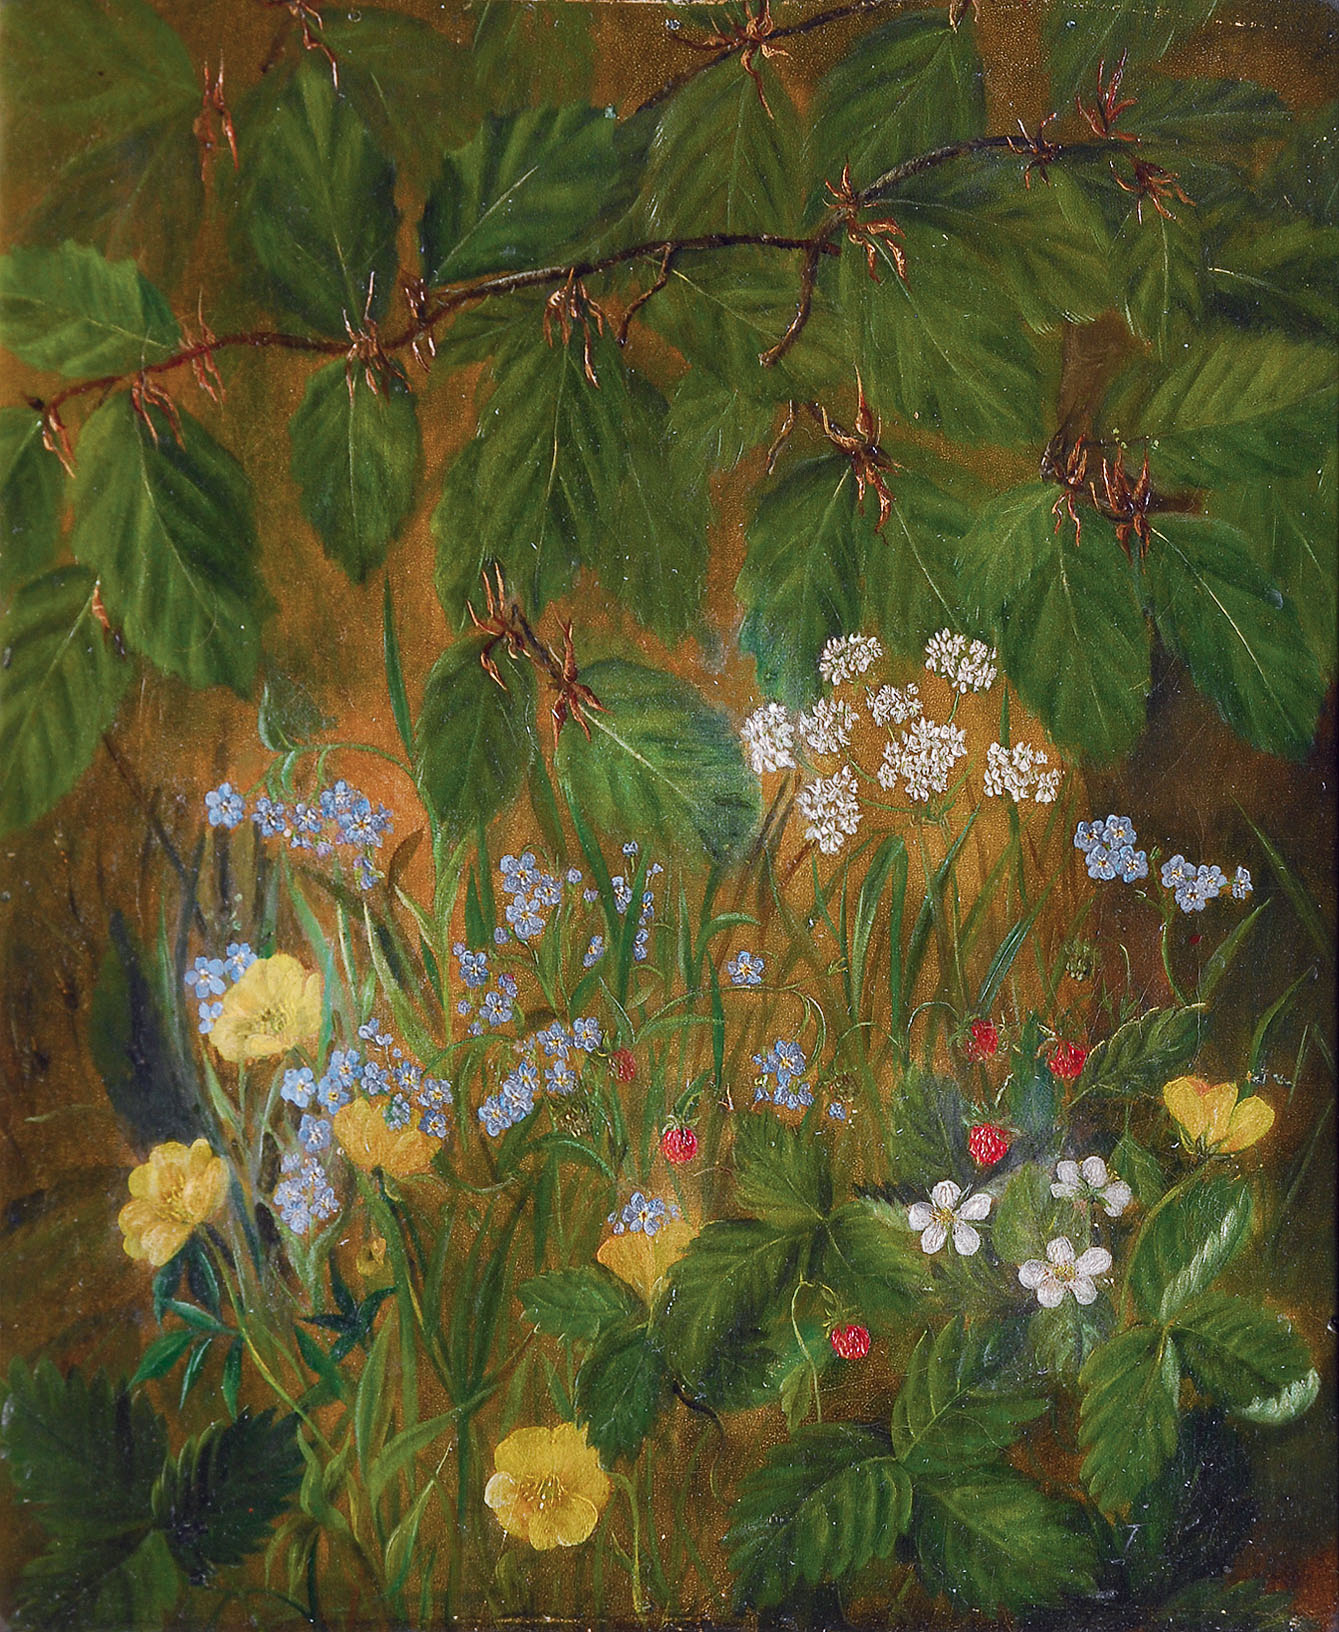 Forest floor with flowers